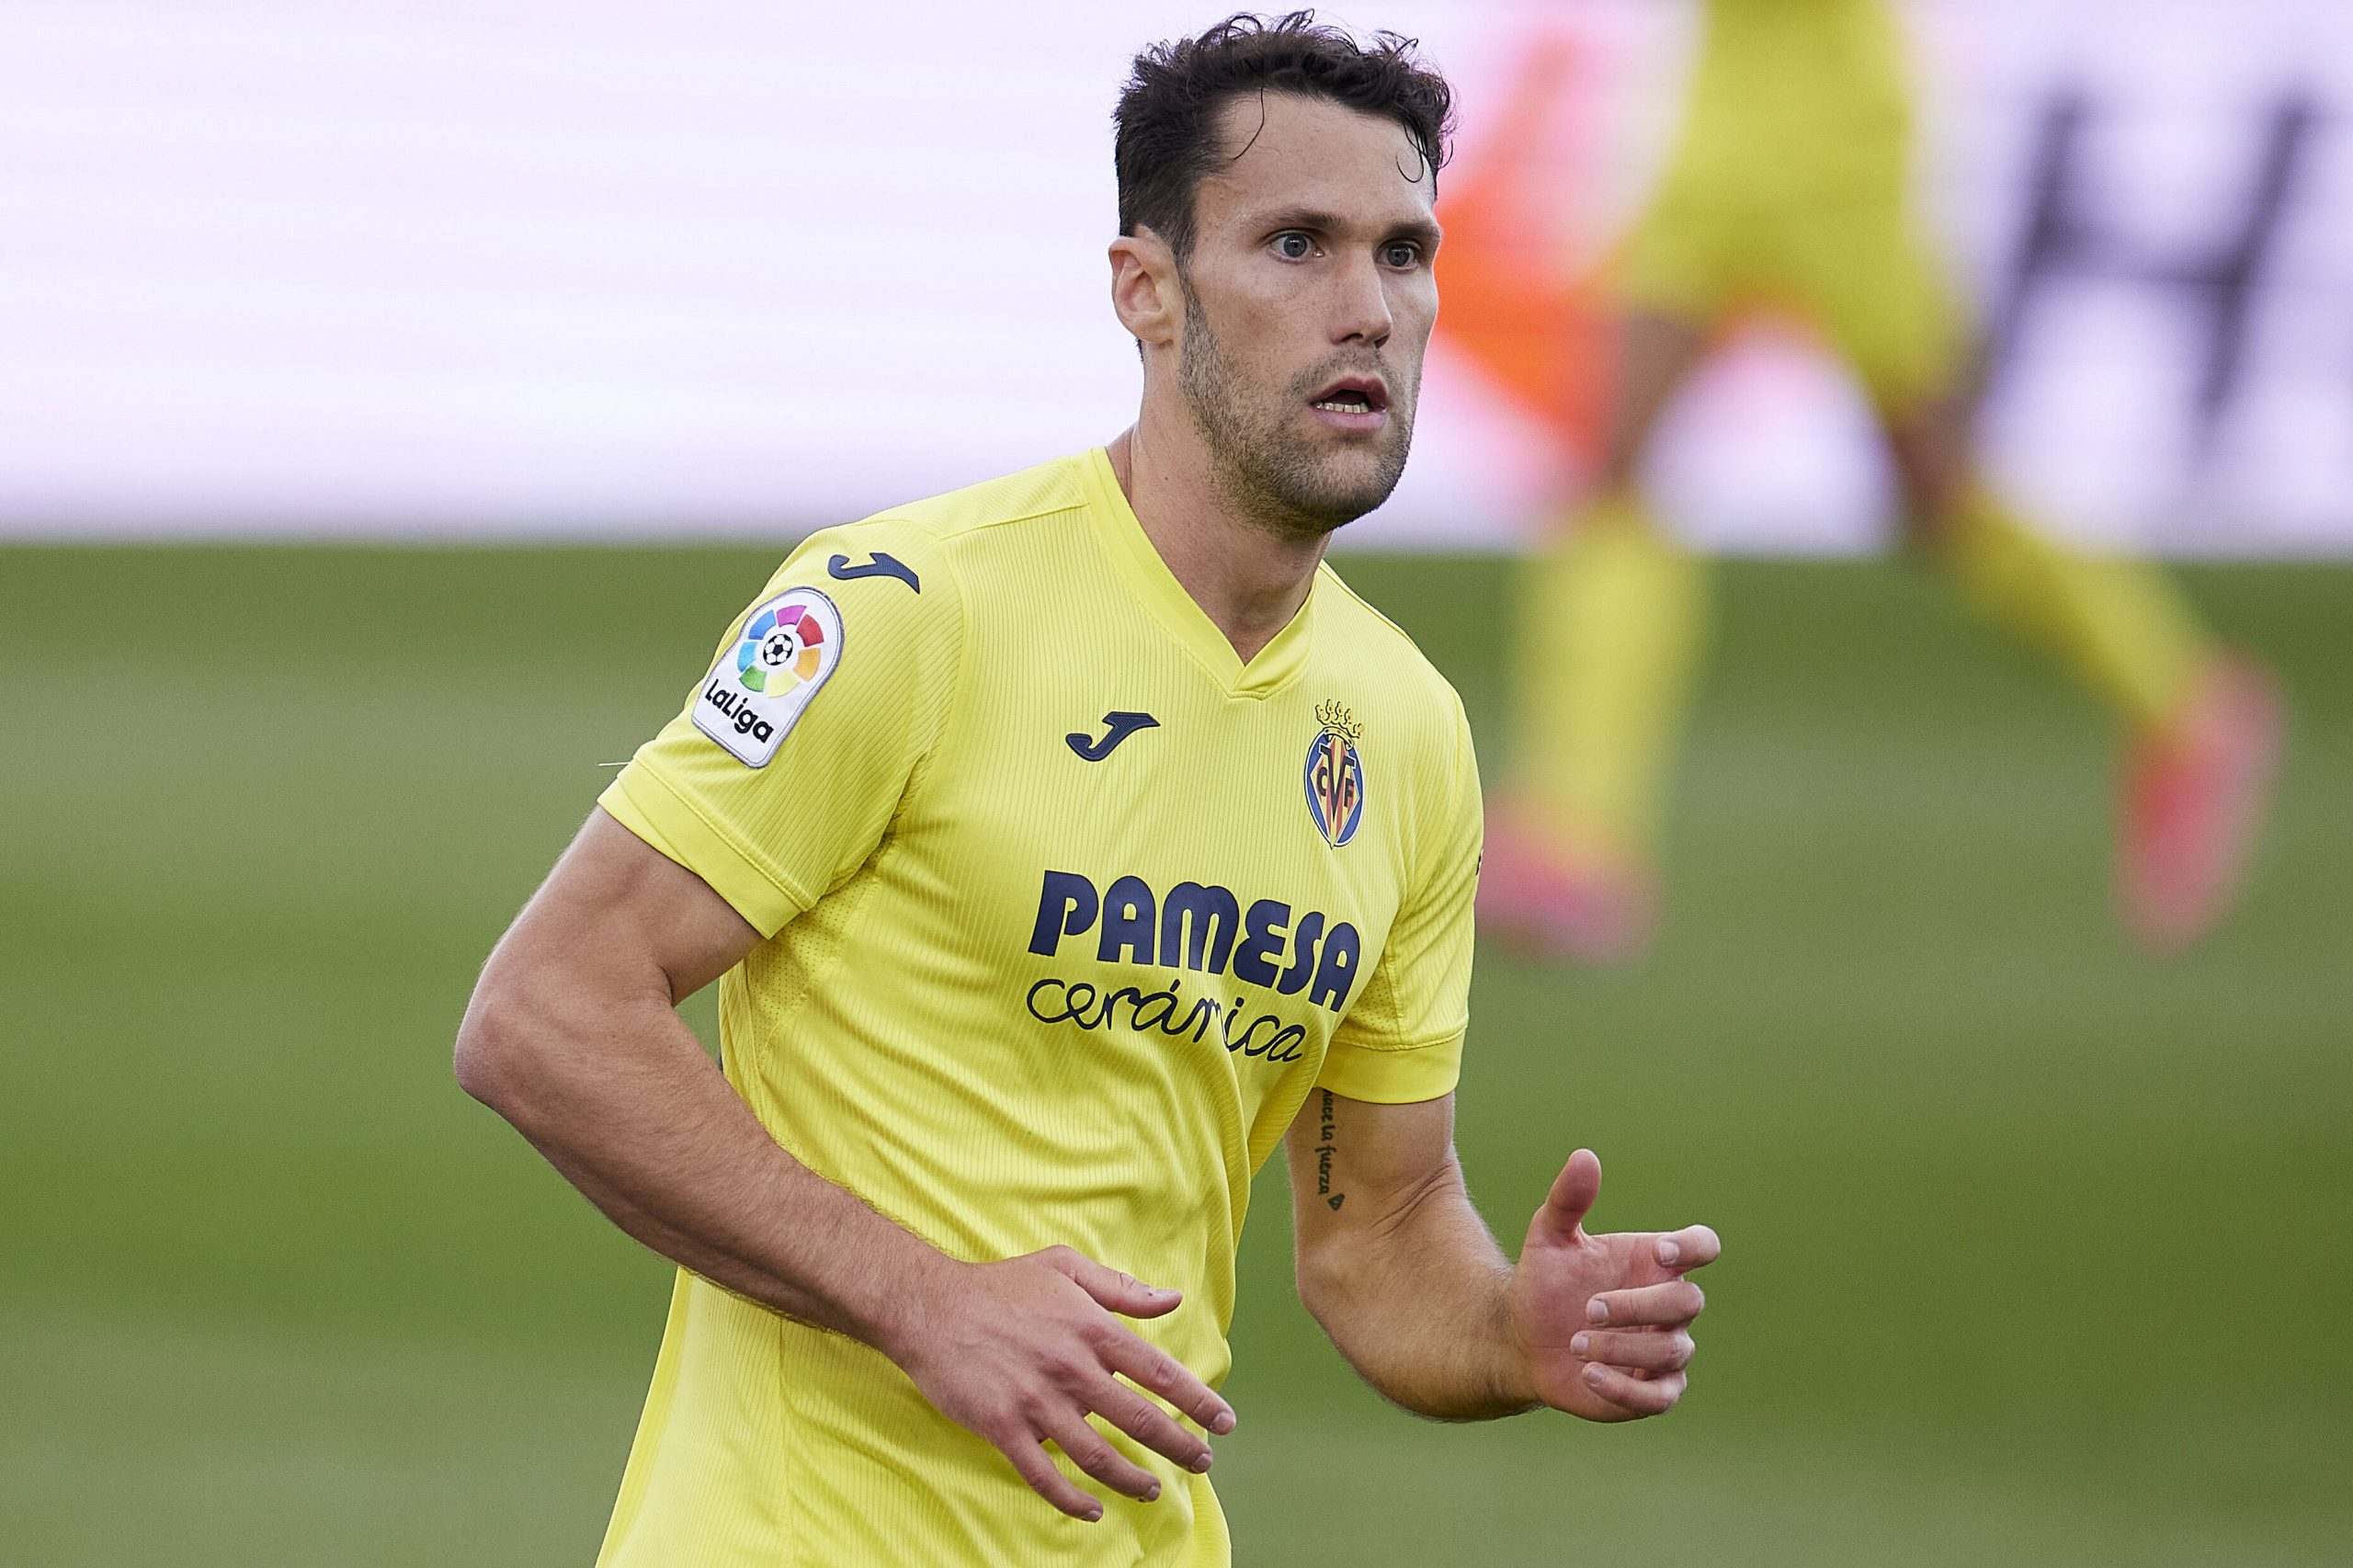 Villarreal star, Alfonso Pedraza, is on the transfer radar of Chelsea, AC Milan, Napoli, and Barcelona.